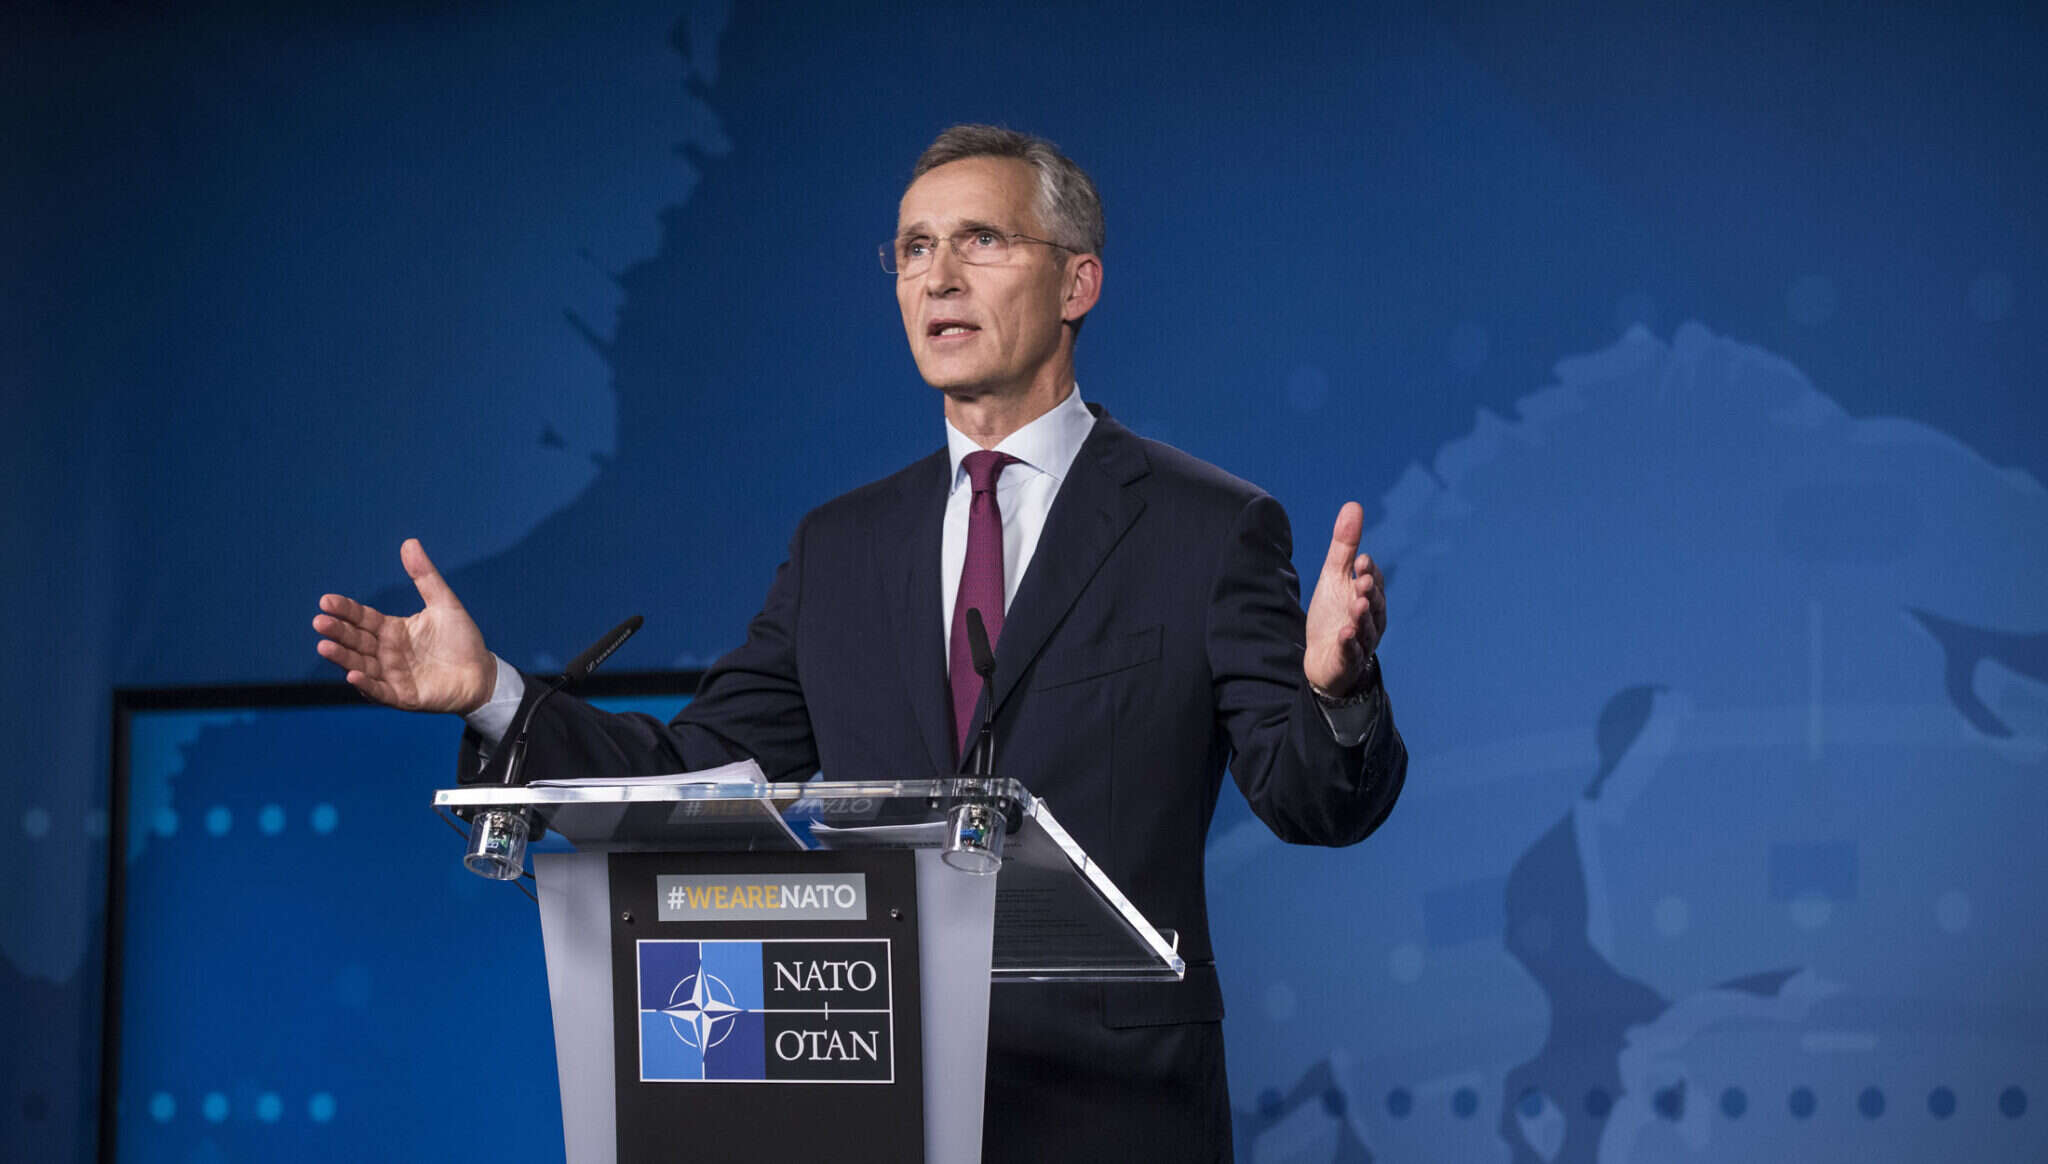 NATO's CIO Hunt: "We Want Candidates from a Wide Range of Backgrounds"